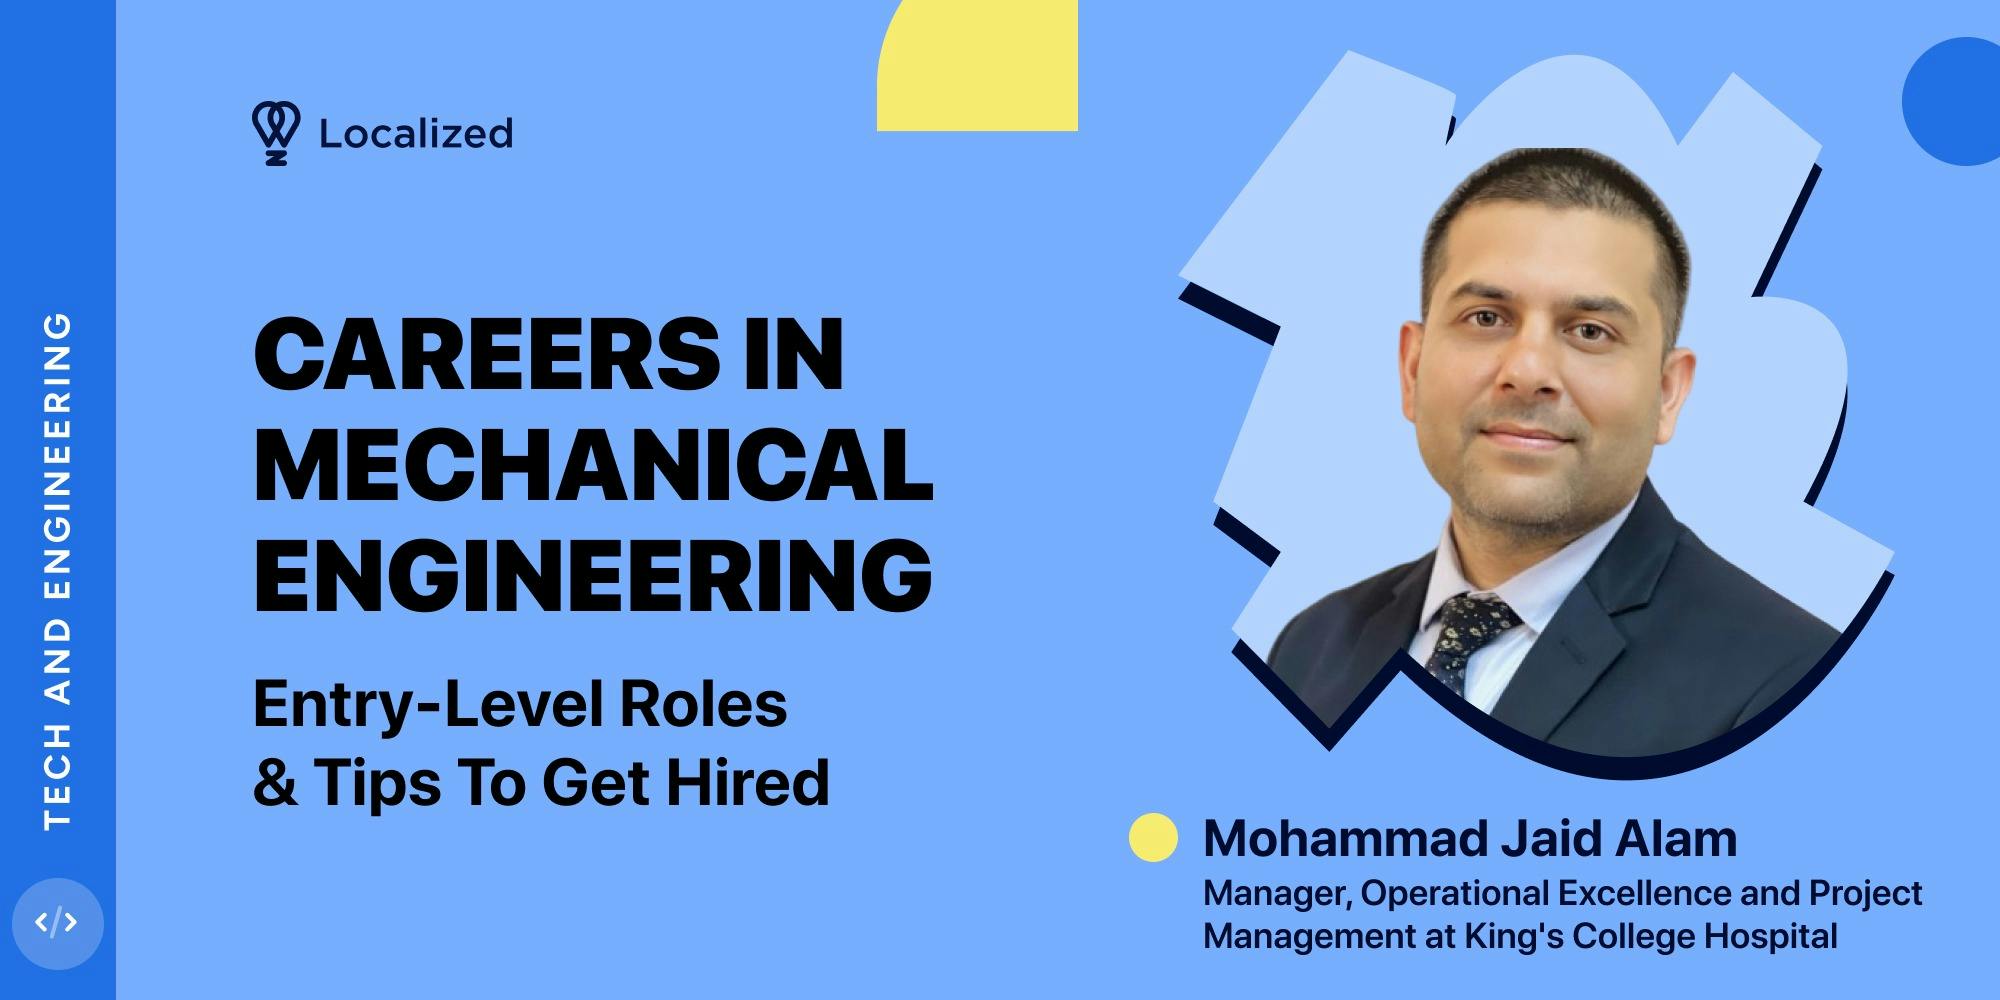 Careers in Mechanical Engineering: Entry-Level Roles and Tips to Get Hired